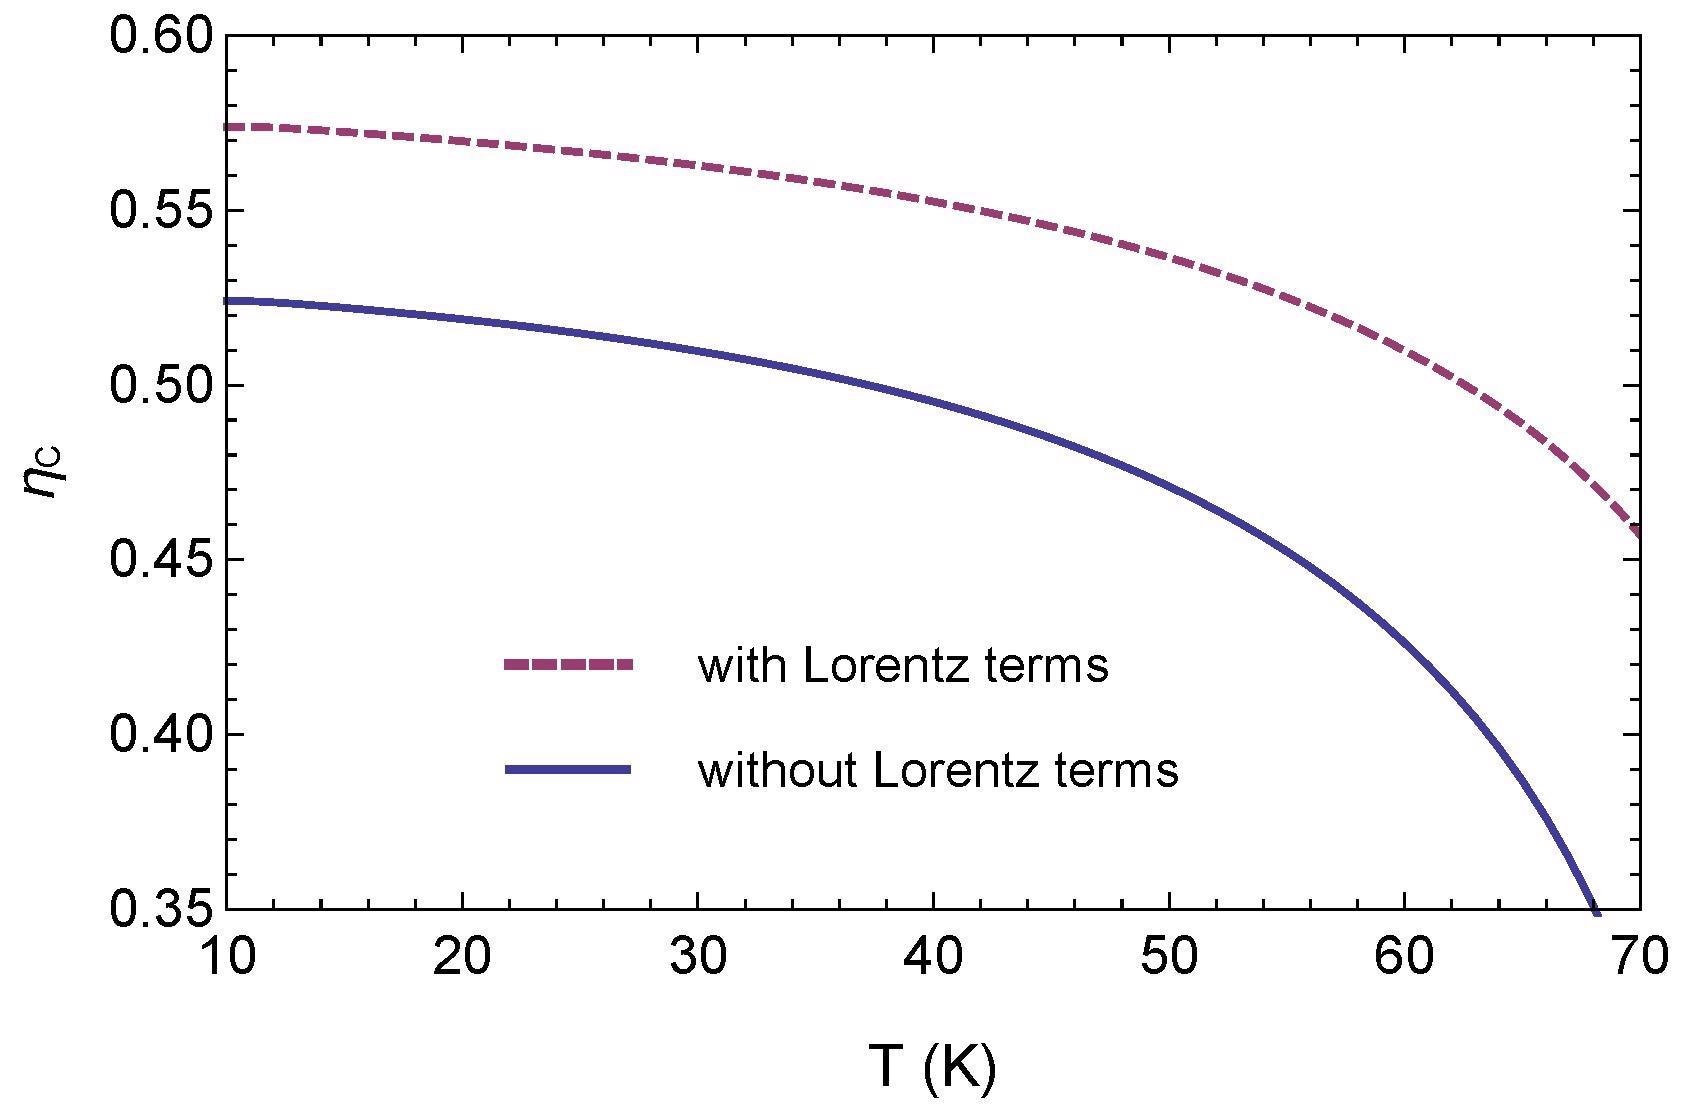 Comparison between normalized Casimir force acting on the superconductive plates with and without terms based on the Lorentz model.